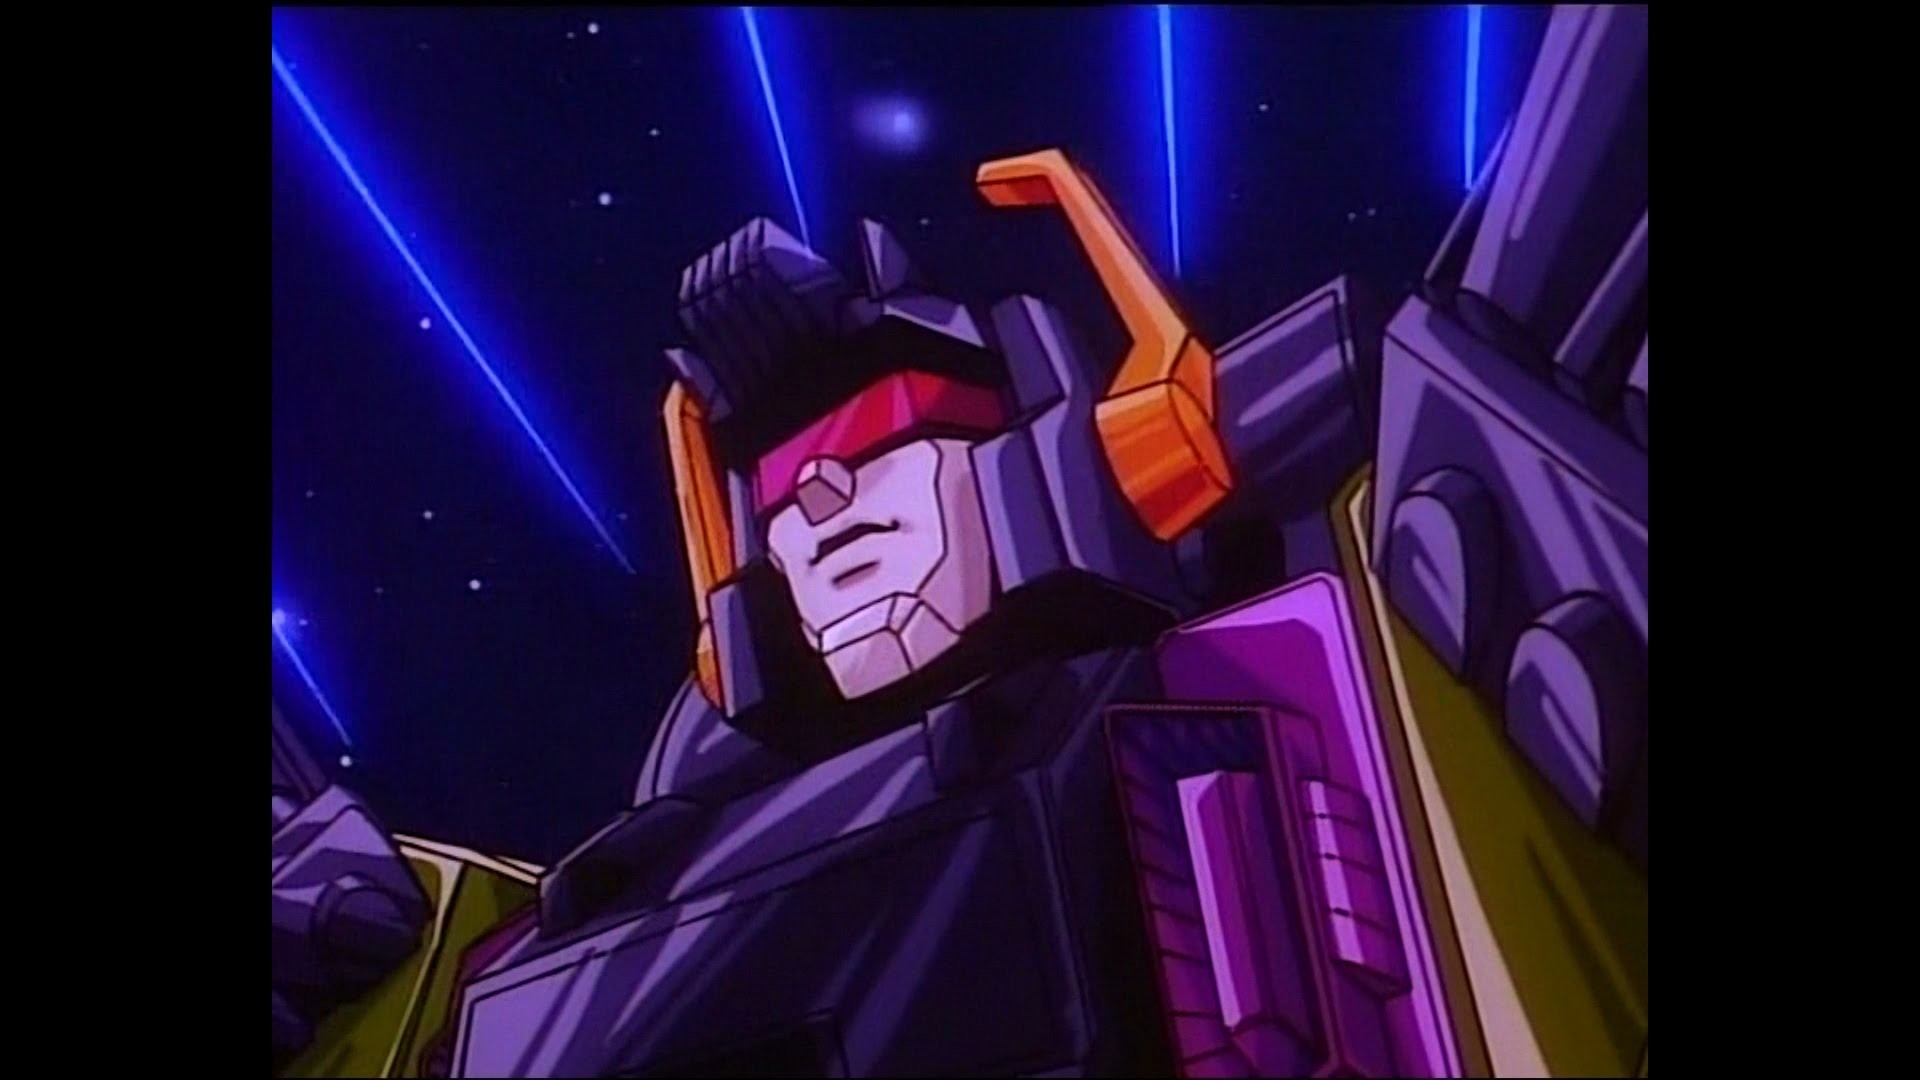 1920x1080 Awesome 80's Cartoon and TV Show Intros Transformers season 4 - YouTube